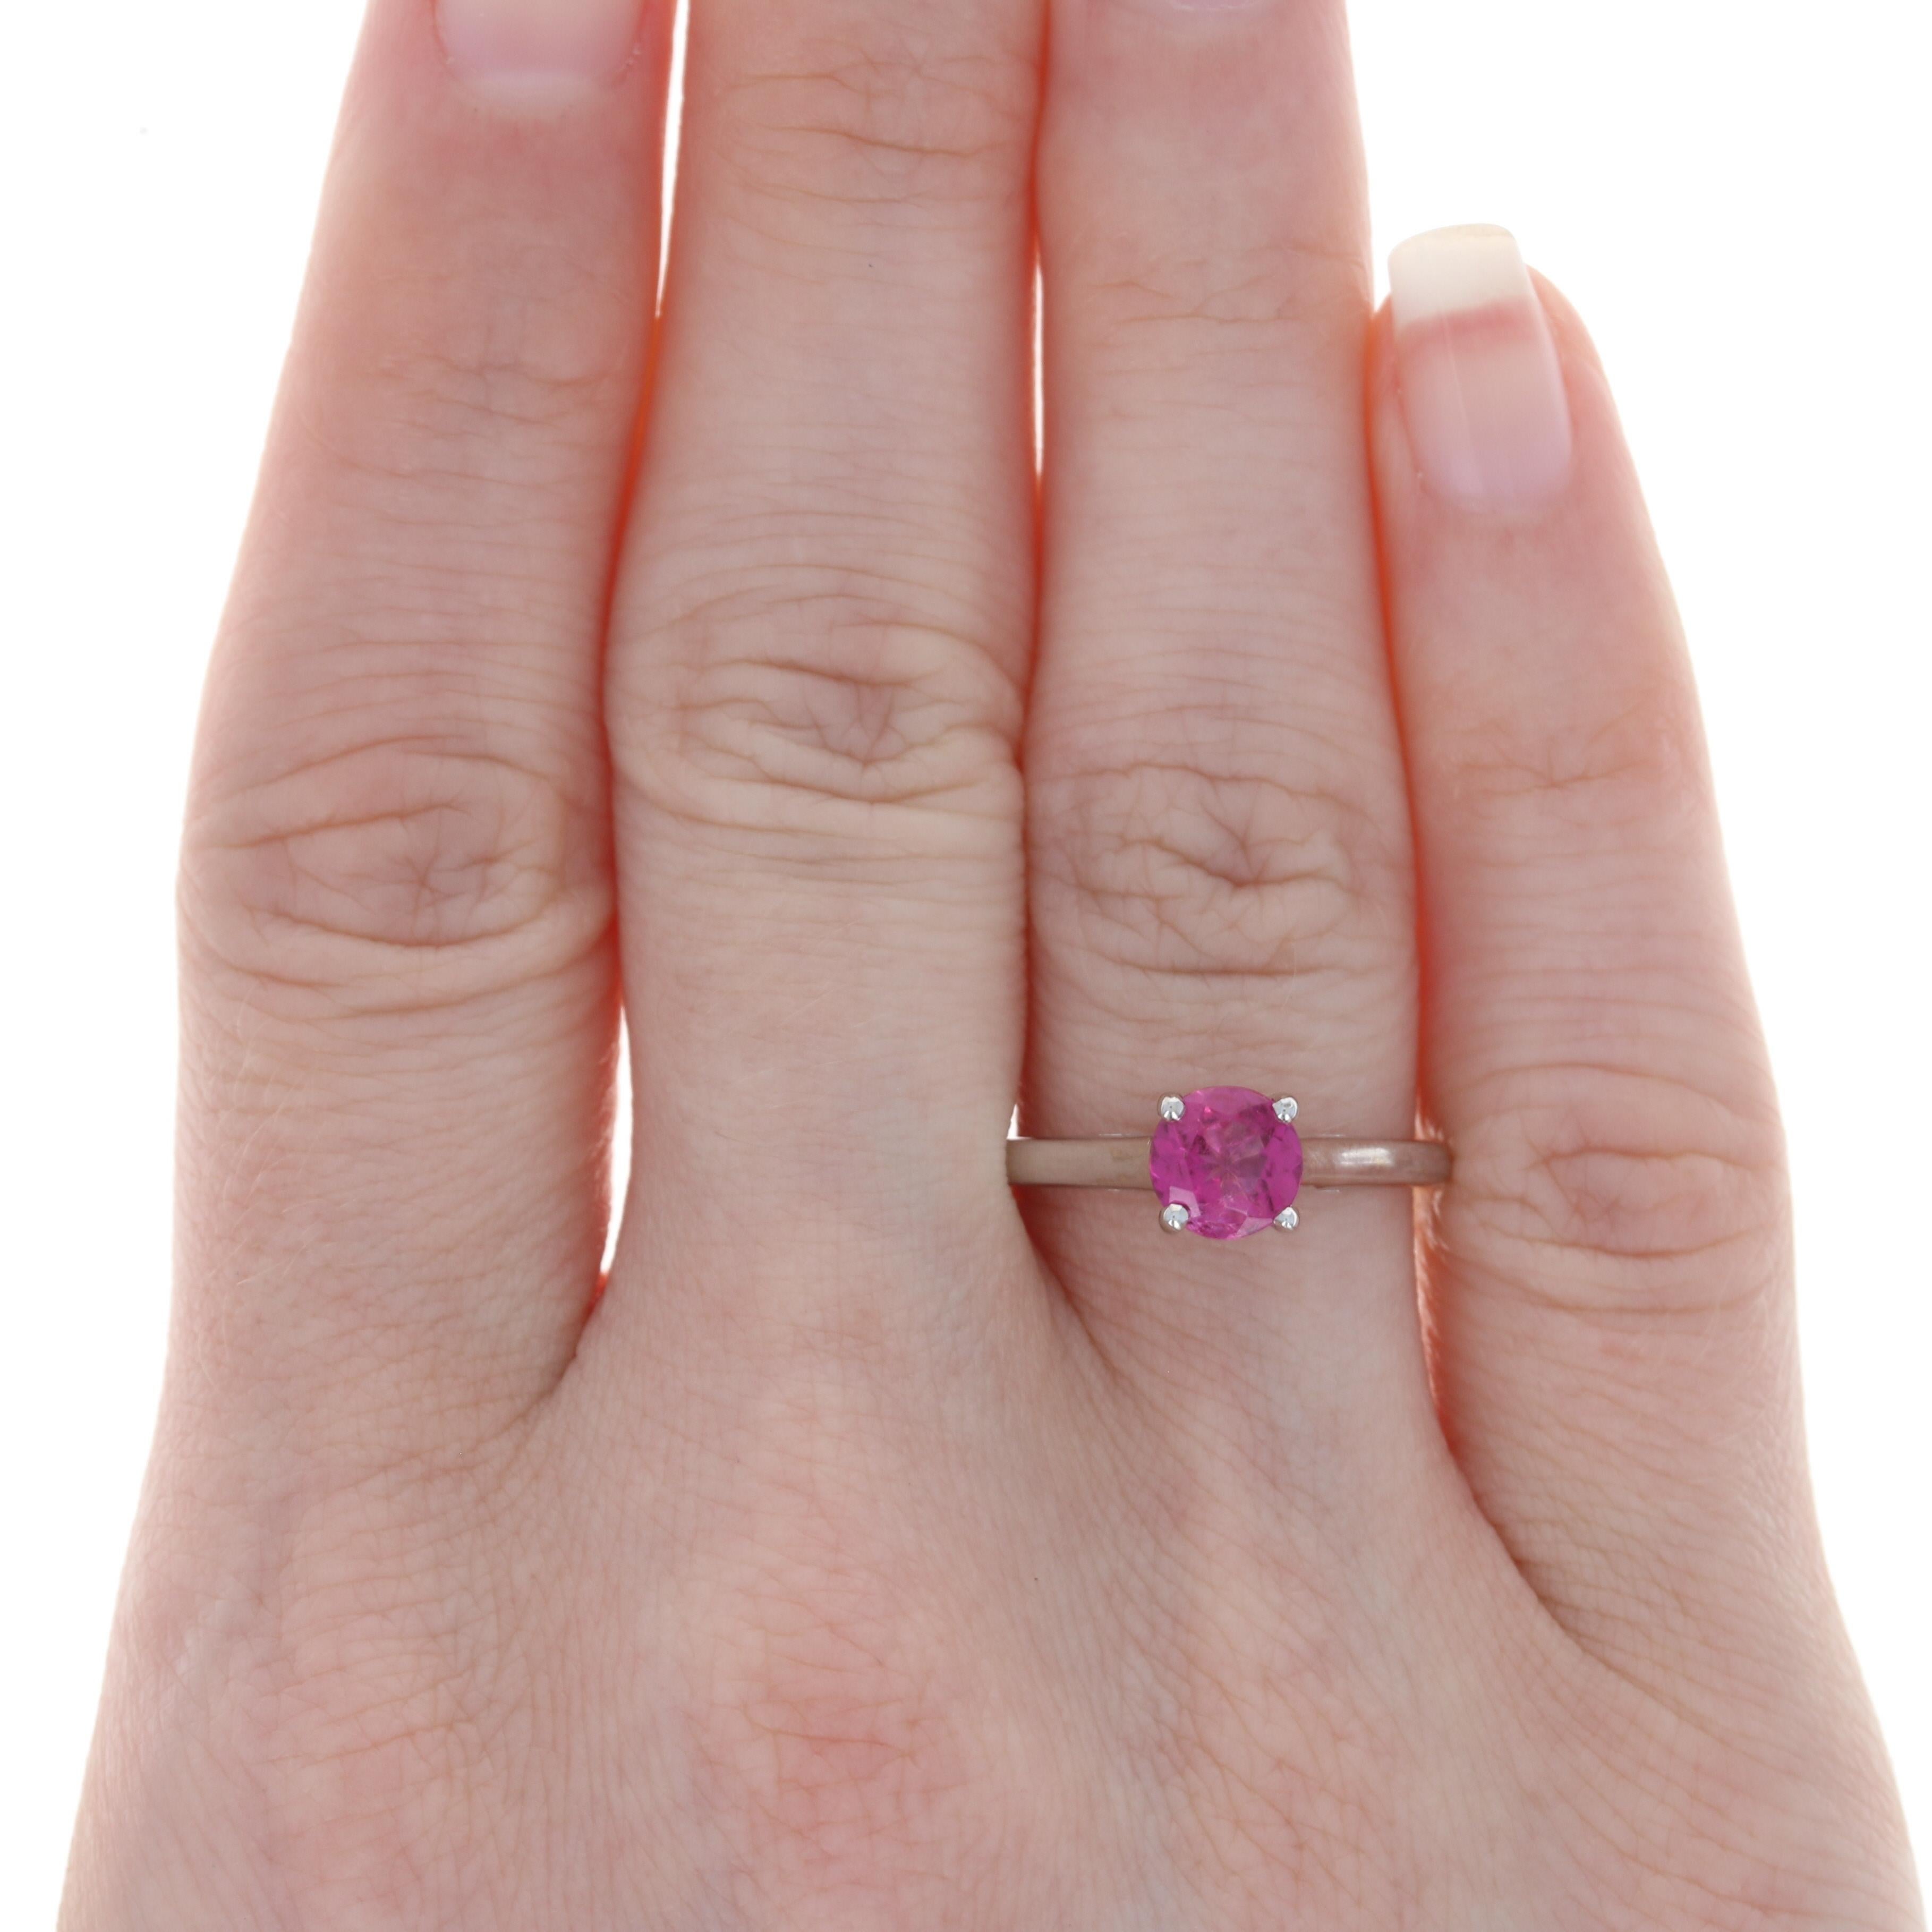 Size: 7
 Sizing Fee: Up or Down 2 sizes for $25
 
 Metal Content: 14k White Gold
 
 Stone Information: 
 Genuine Tourmaline
 Carat: .82ct (weighed)
 Cut: Round
 Color: Pink
 Diameter: 6.2mm 
 
 Style: Solitaire
 Features: Cathedral Mount
 
 Face